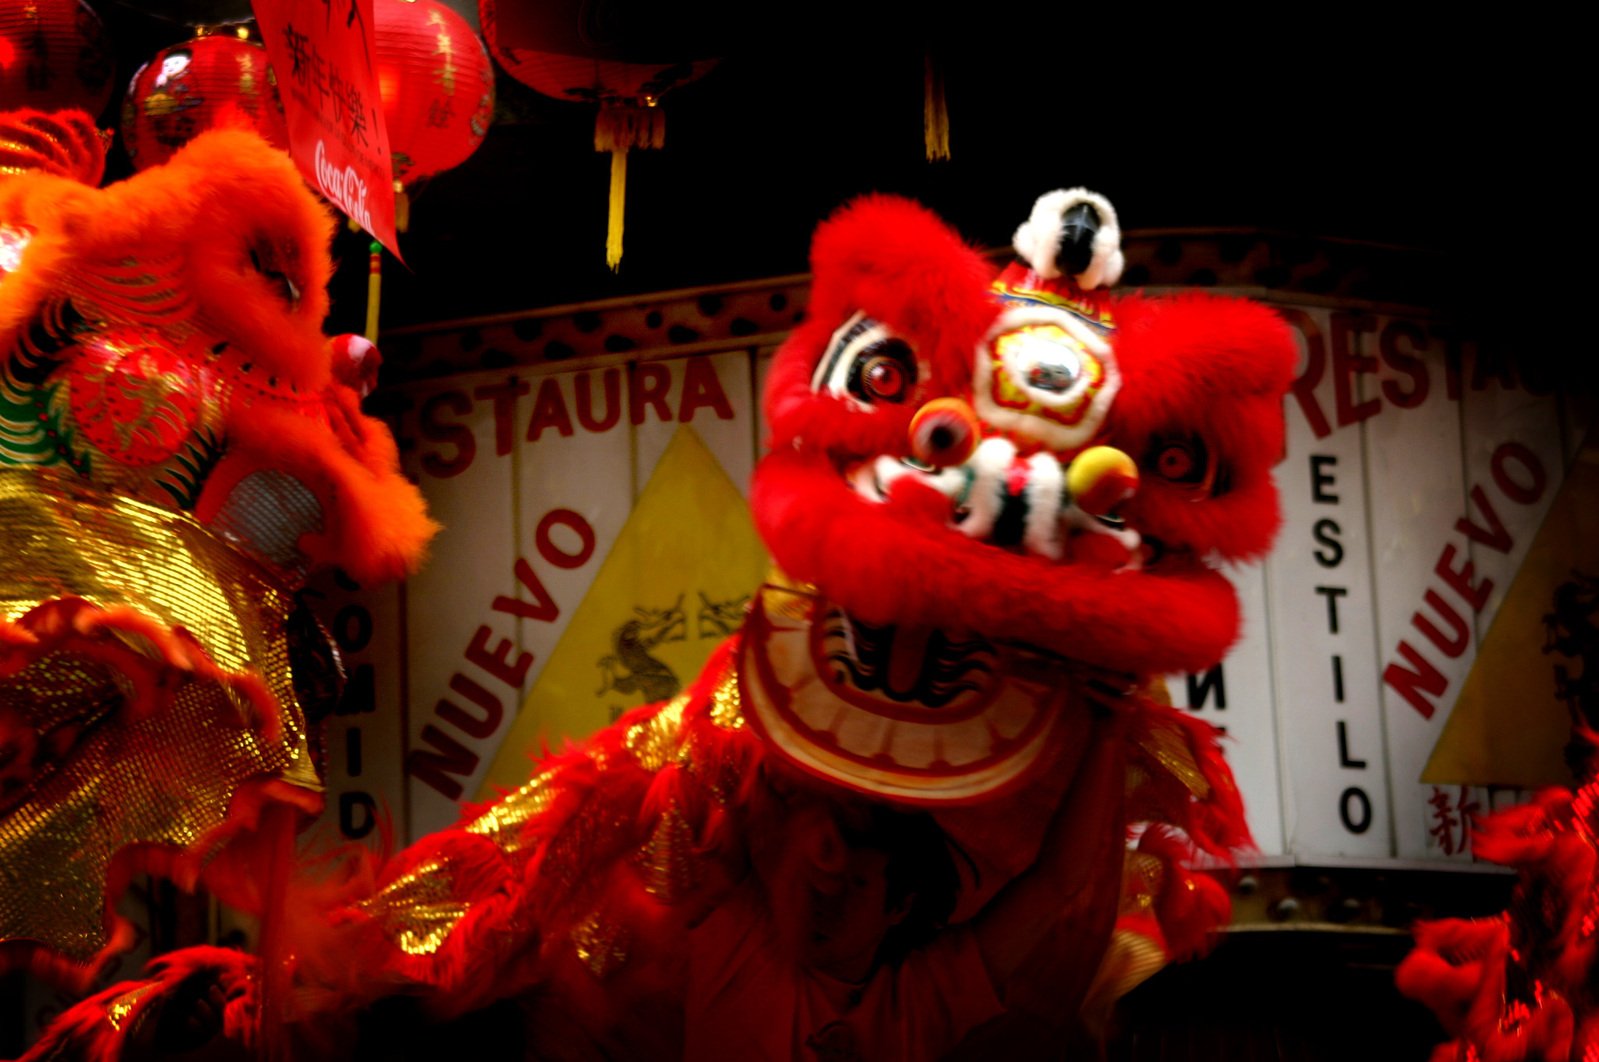 a fireworked lion dance costume stands beside other elaborate chinese decorations